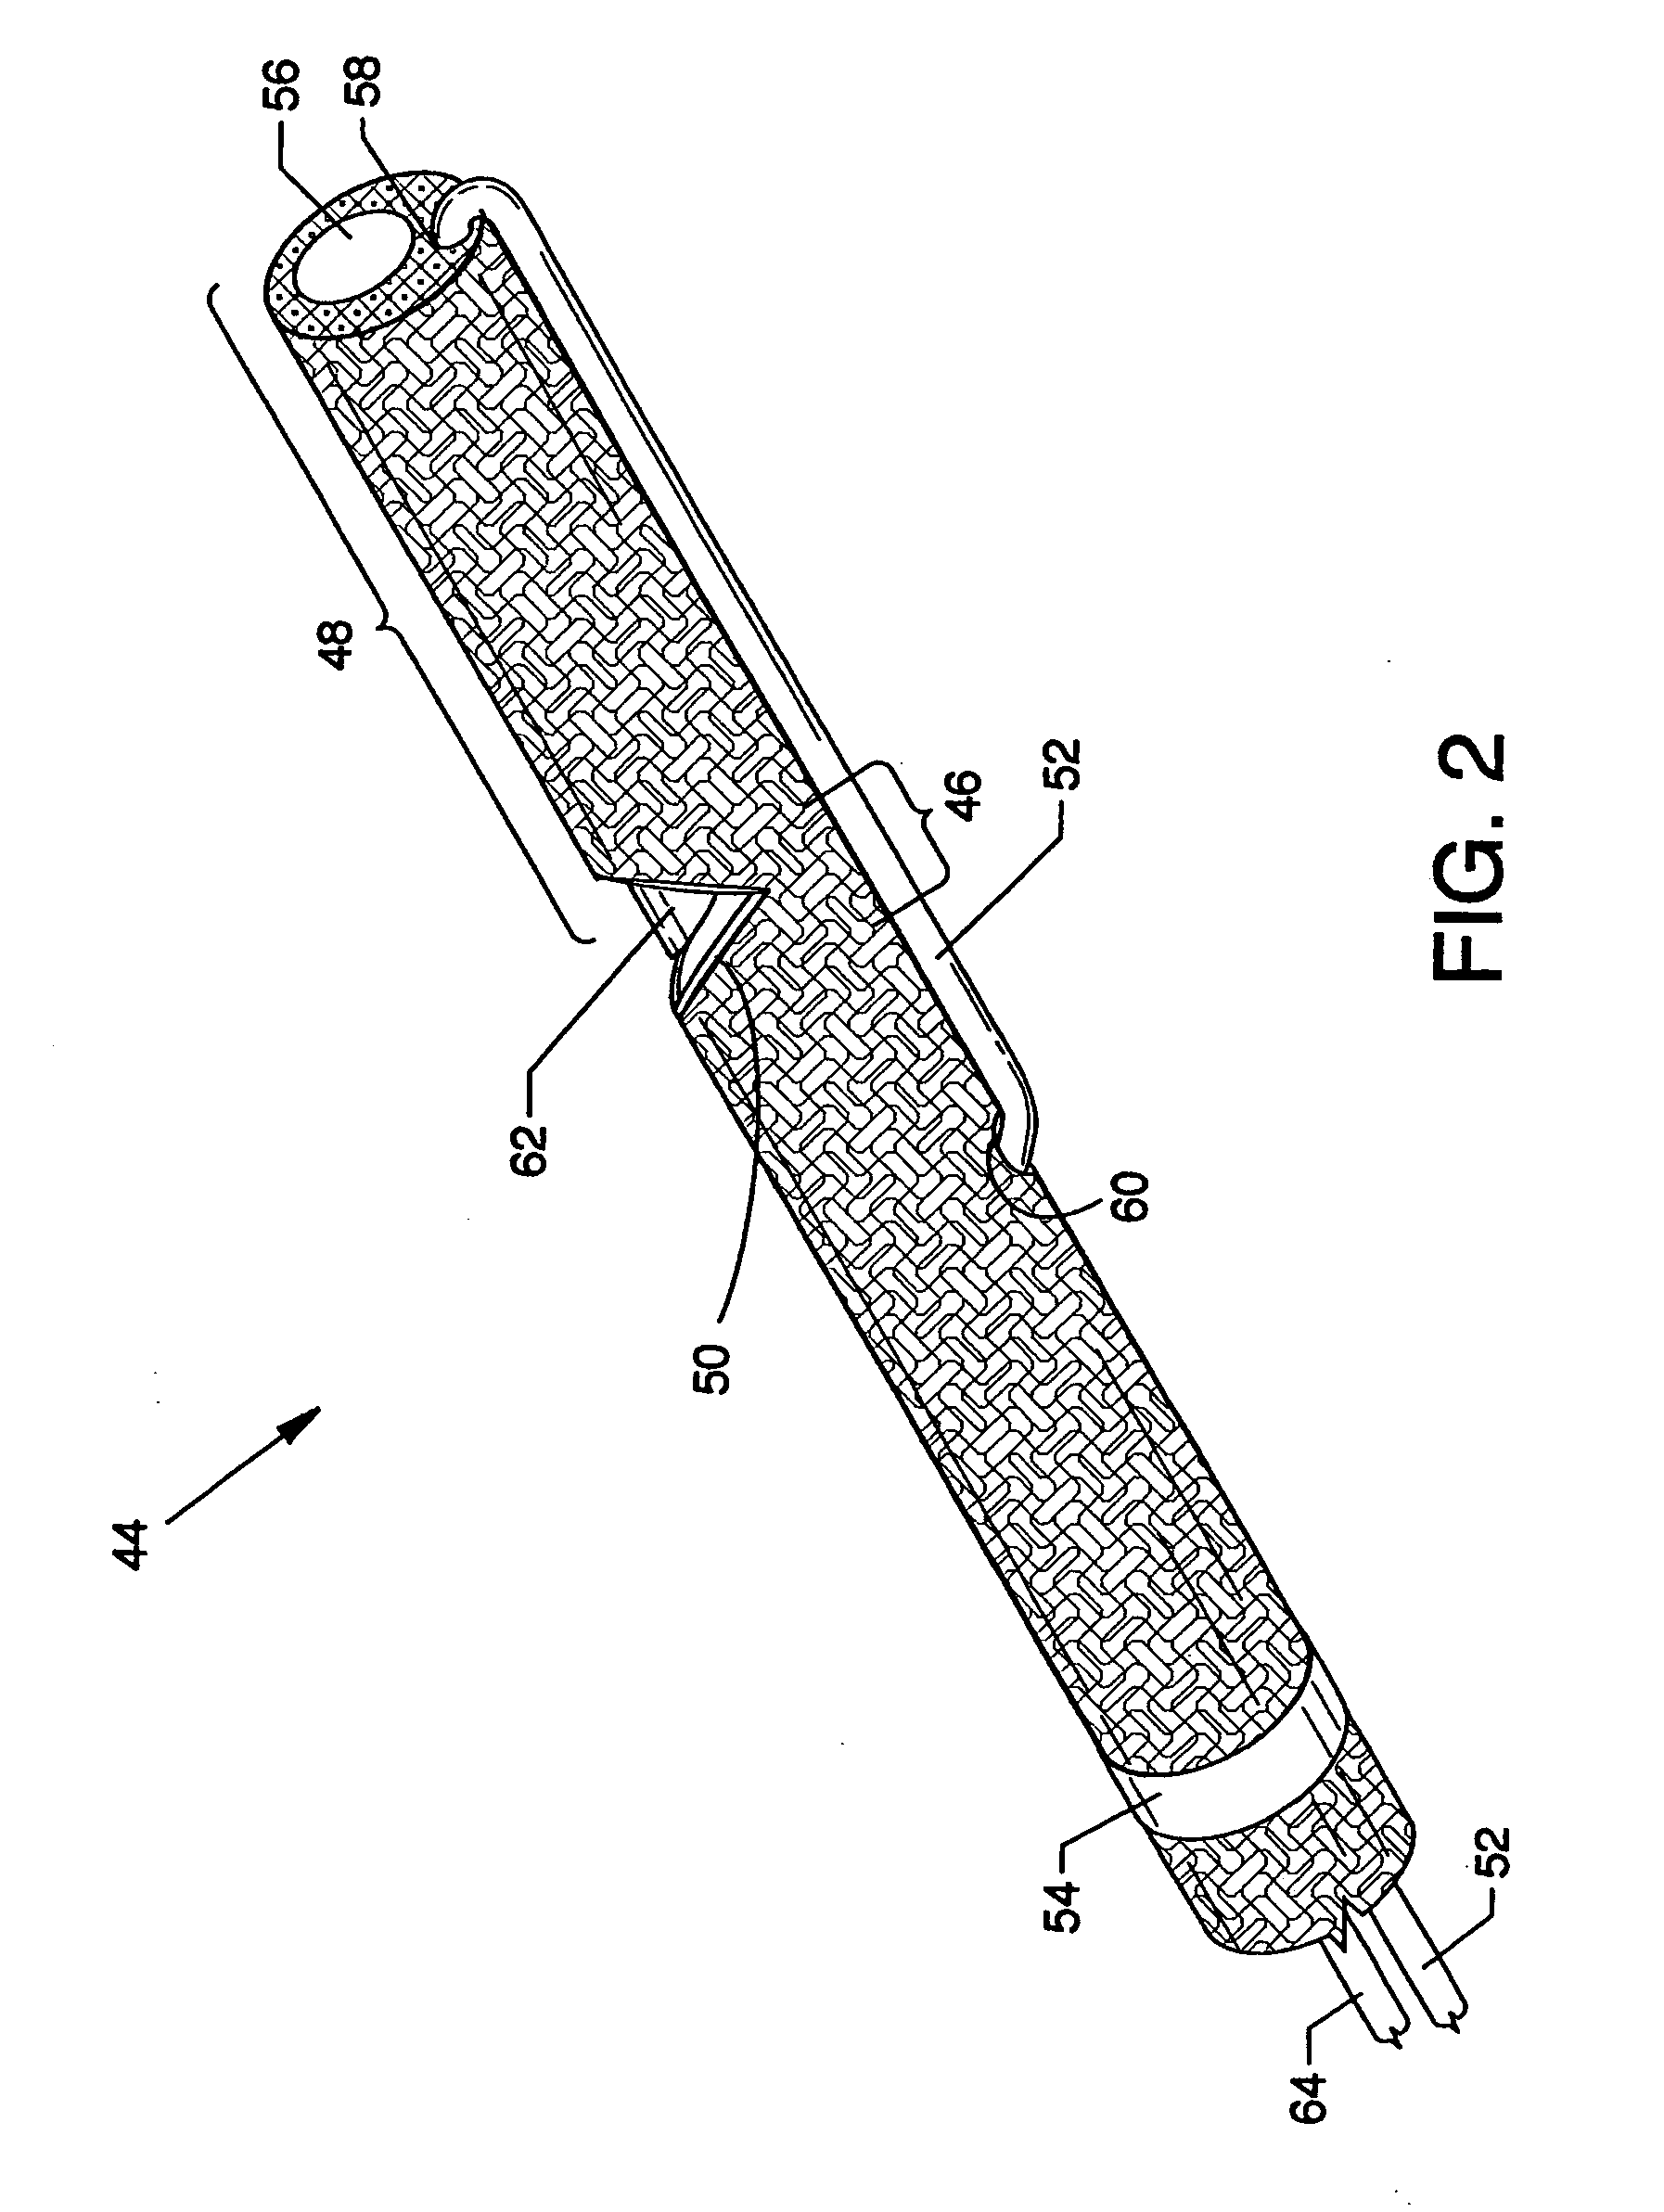 Atherectomy system having a variably exposed cutter